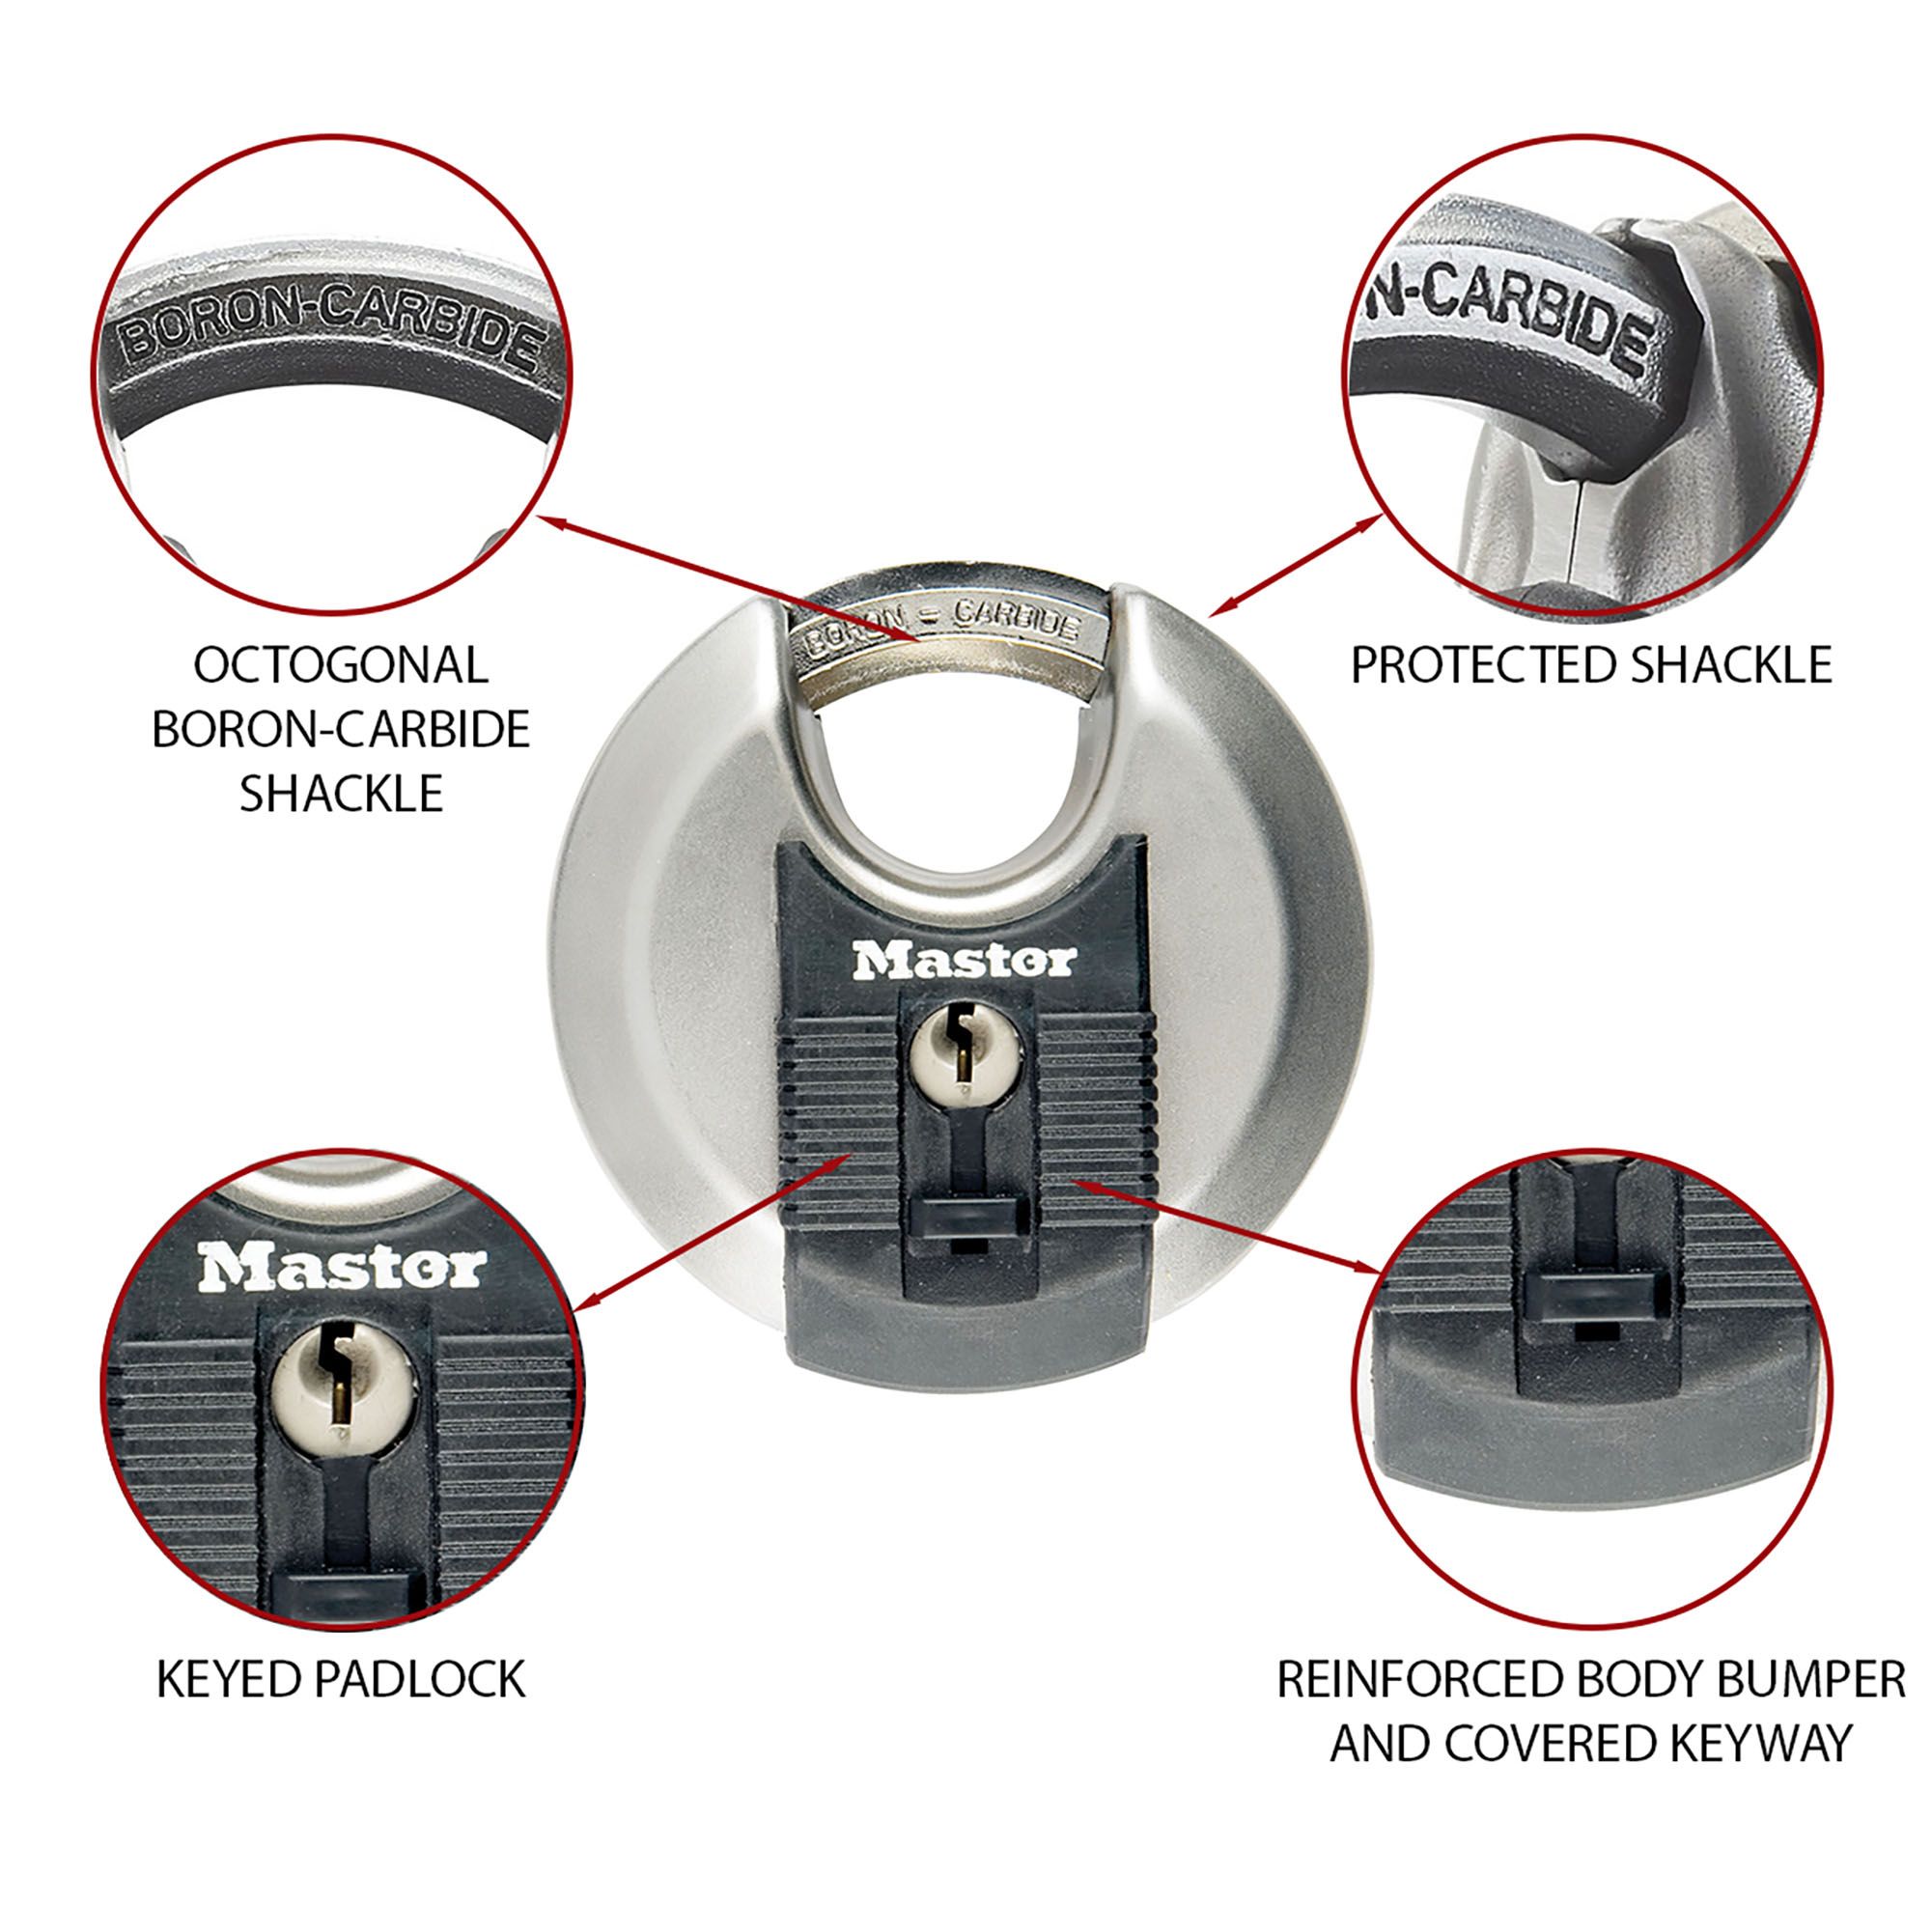 Master Lock Excell Heavy duty Stainless steel Black Closed shackle Disc Padlock (W)80mm